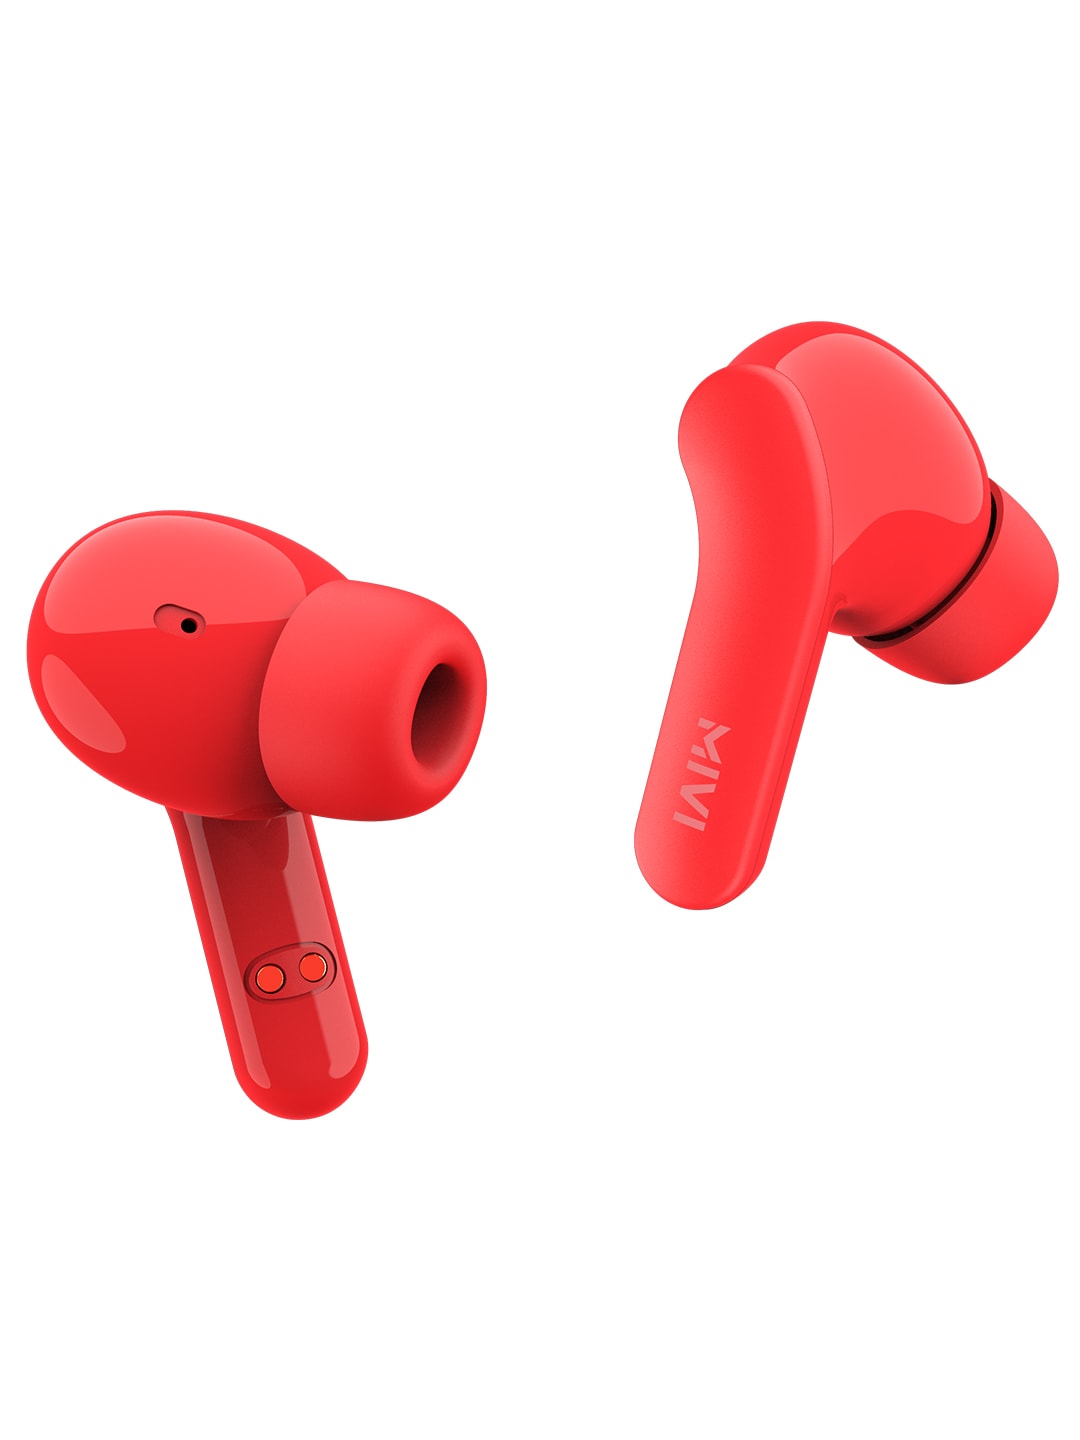 Mivi DuoPods A25 True Wireless Earbuds Bluetooth Wireless Ear Buds- Red Price in India